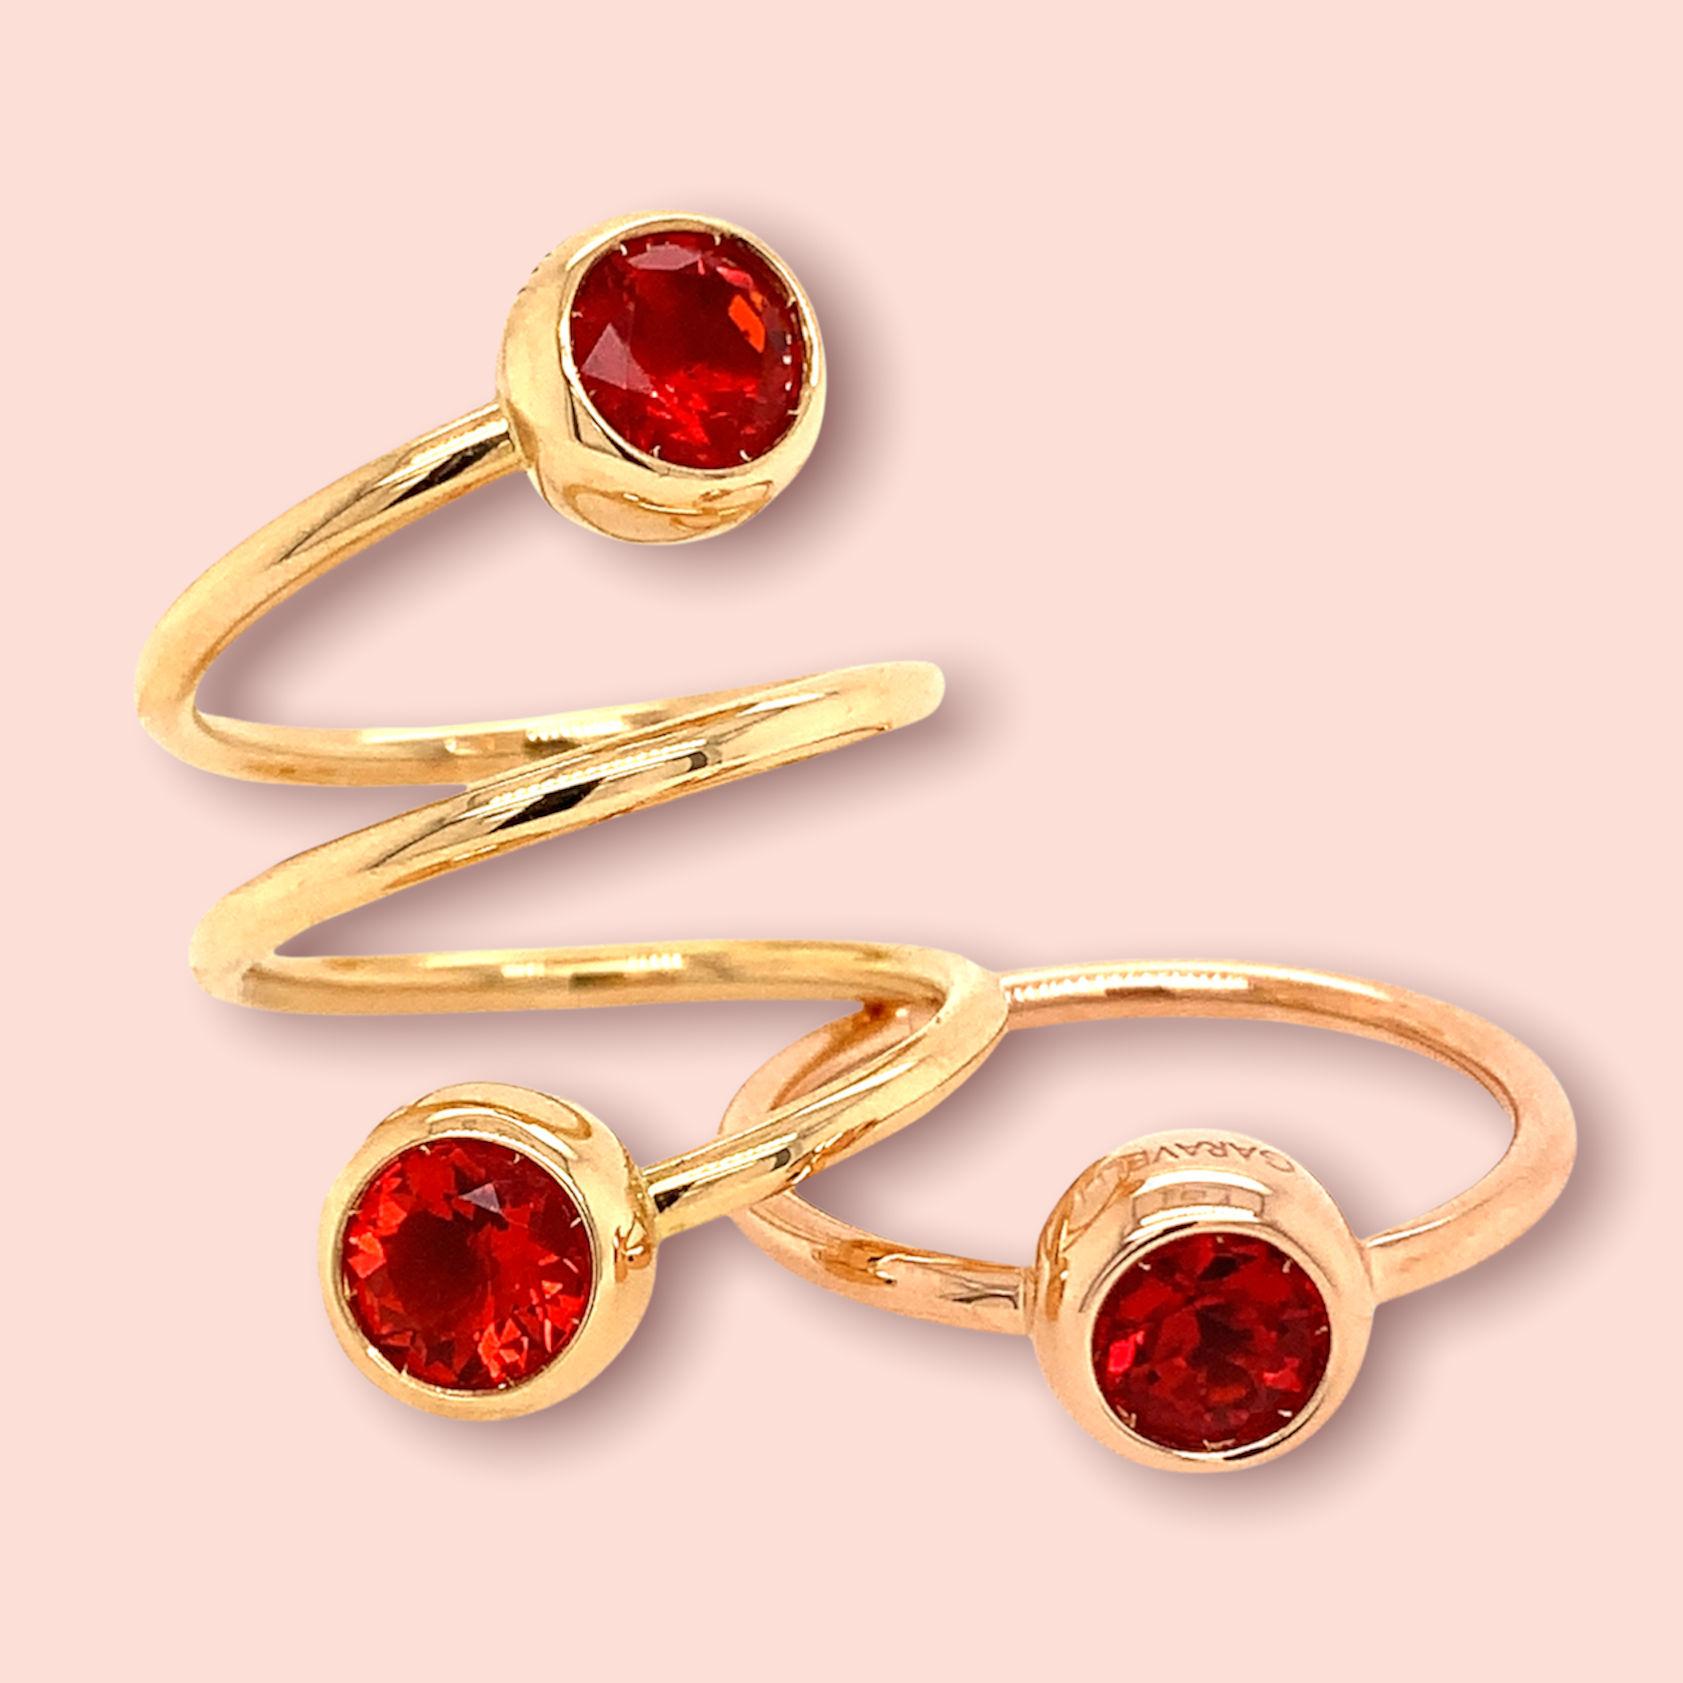 Garavelli 18 Karat Rose Gold Mexican Fire Opal Giotto Collection Ring. Ring size 55  US 7
The gold head of the ring is diameter mm 7 height mm 4
The red mexican fire opal is ct :0.35  diameter 5 mm
18KT GOLD  :GR 2.50
Also available necklace or